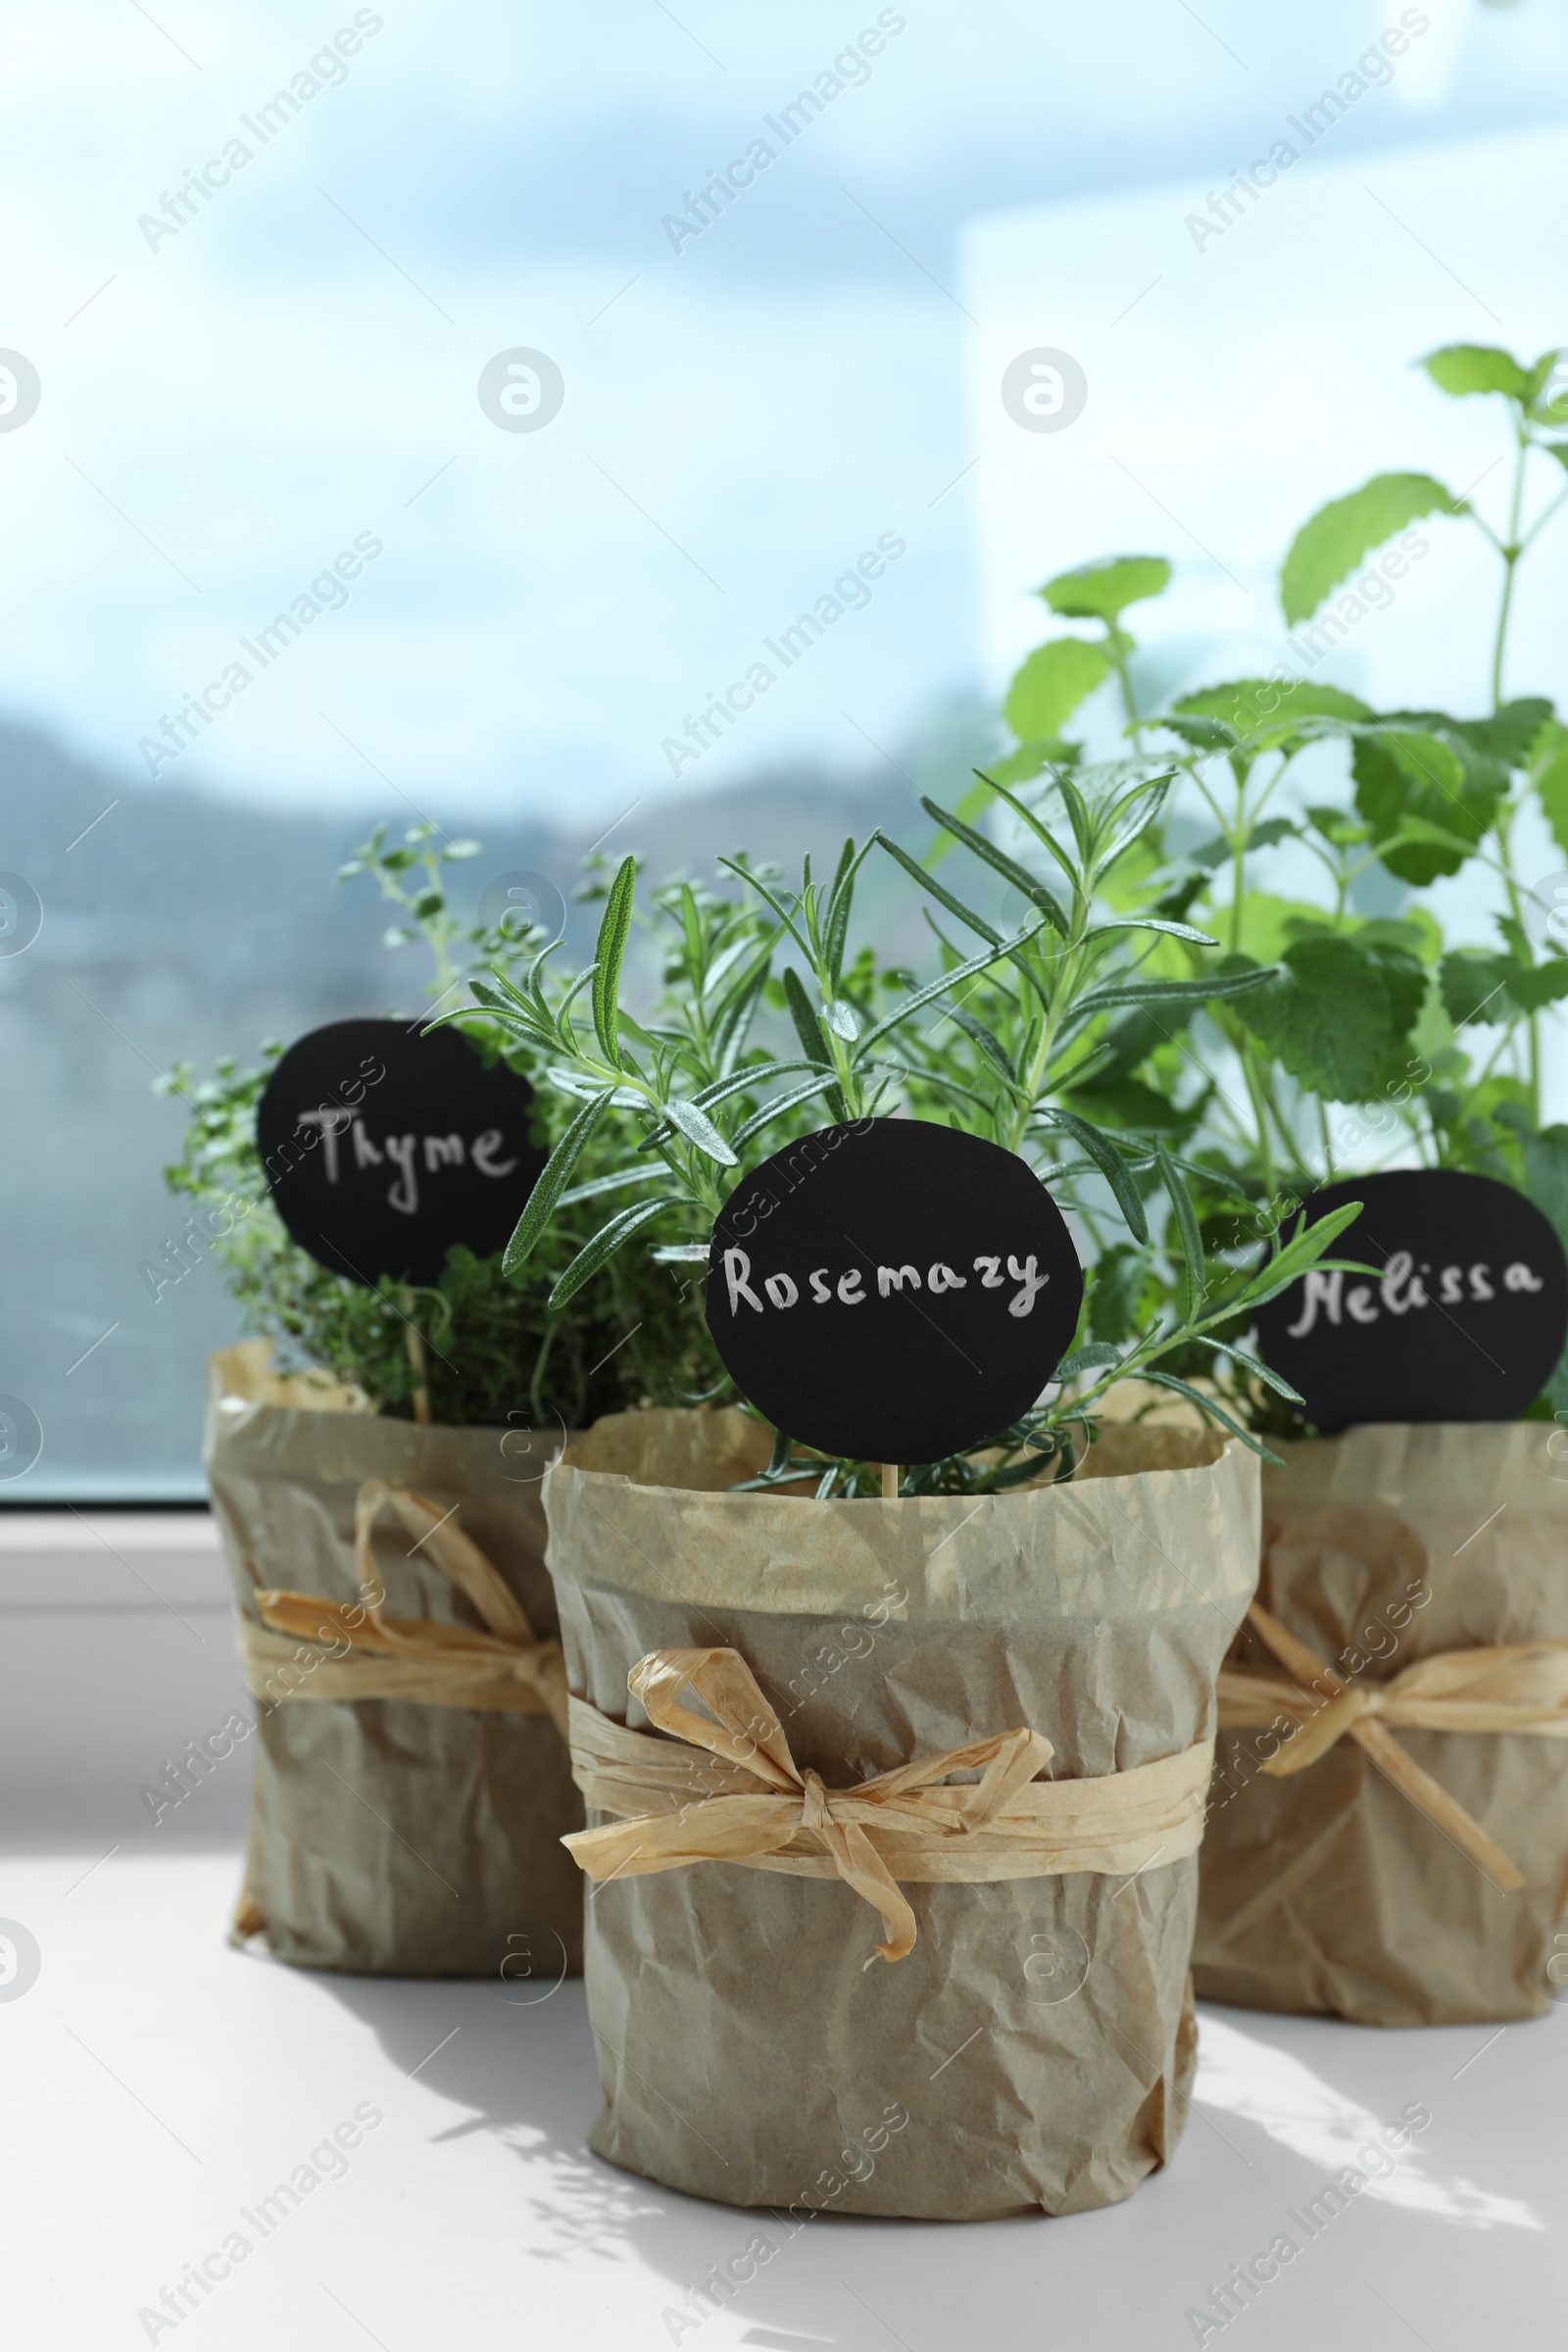 Photo of Different fresh potted herbs on windowsill indoors